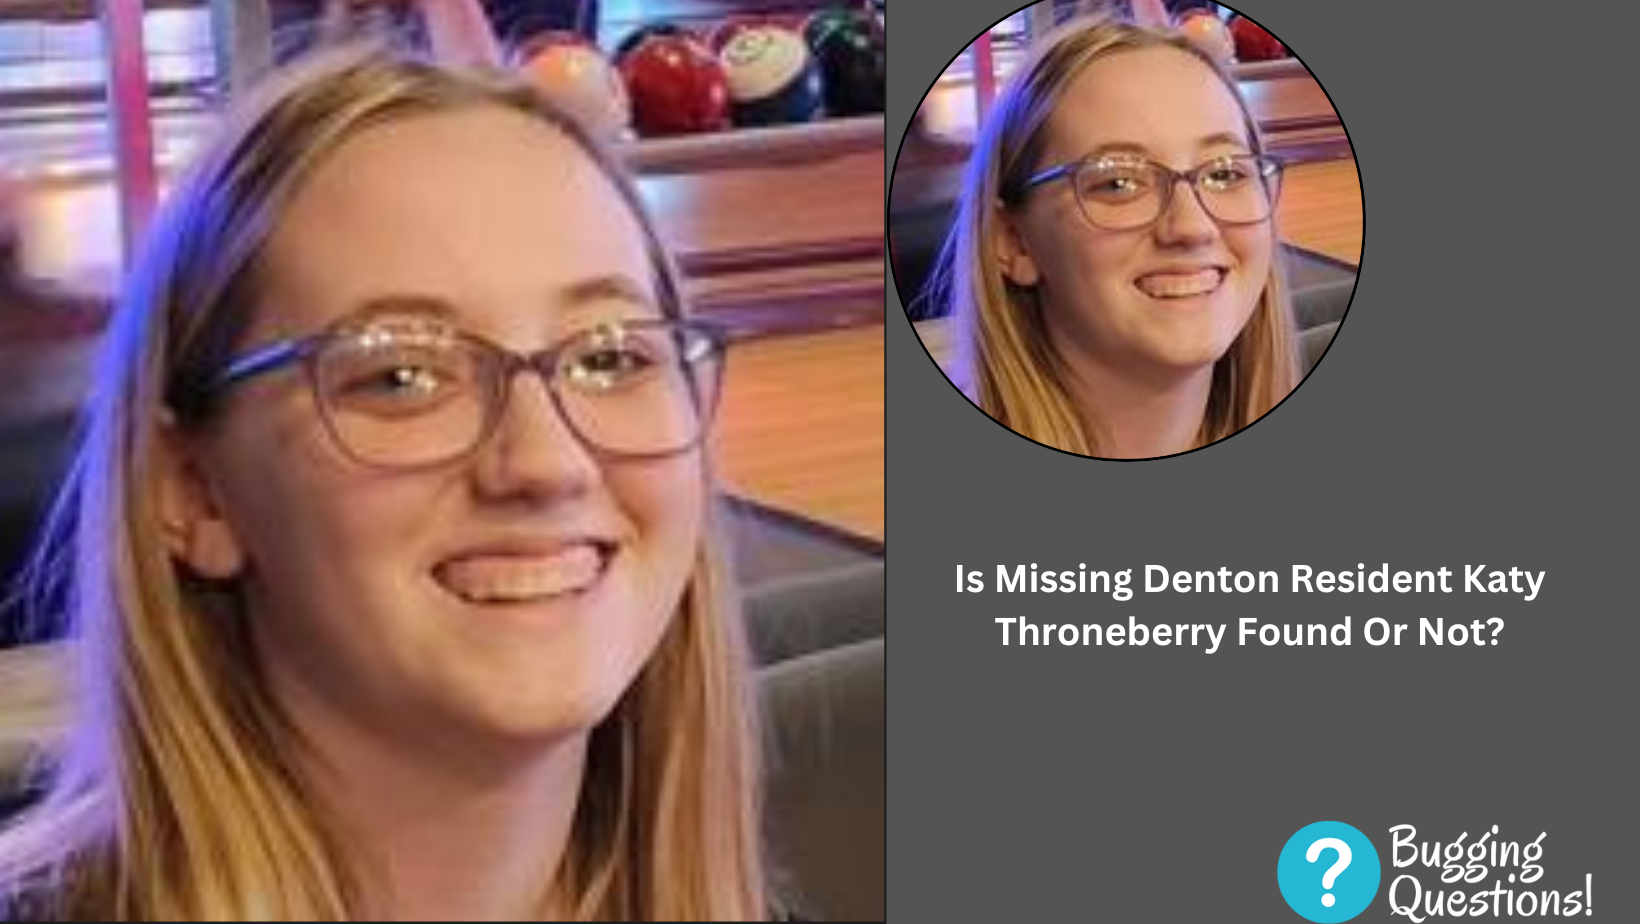 Is Missing Denton Resident Katy Throneberry Found Or Not?